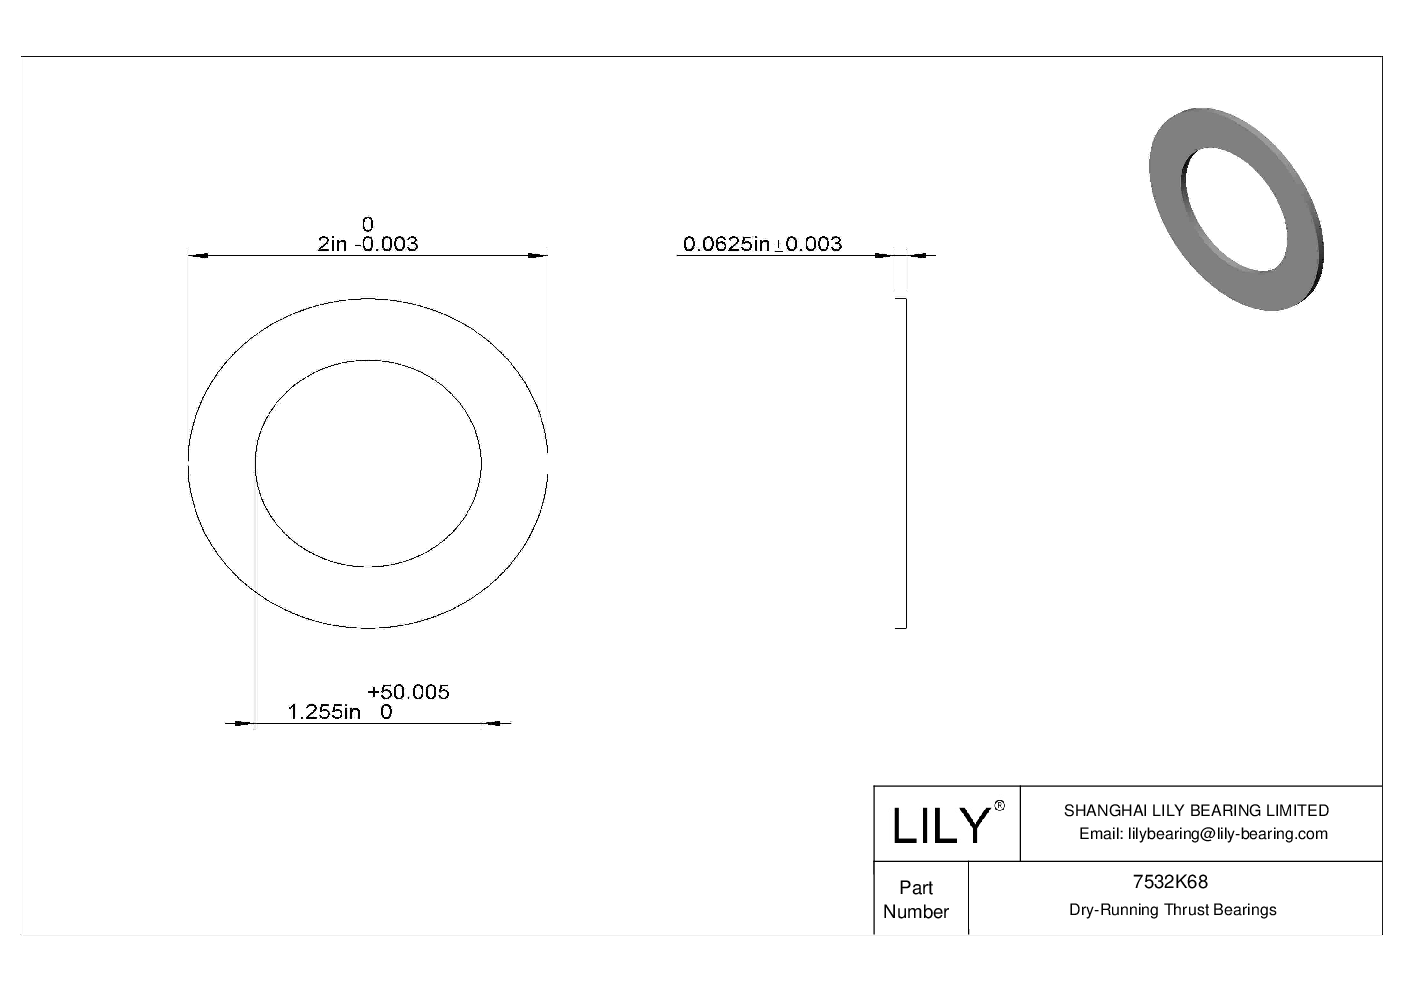 HFDCKGI Water-Resistant Dry-Running Thrust Bearings cad drawing